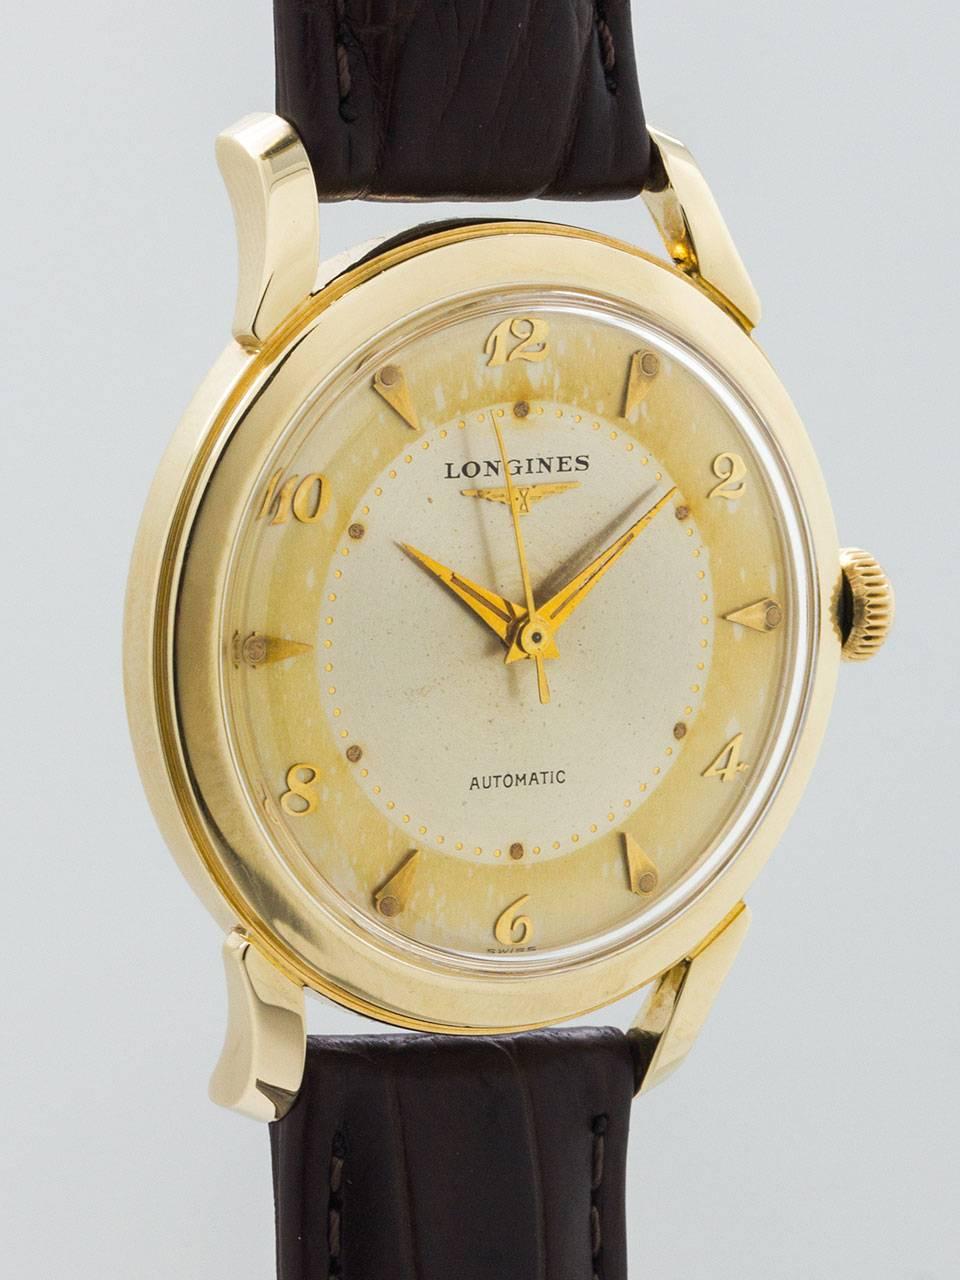 Longines Automatic 14K YG oversize 35 X 42mm screw back case with contoured and elongated lugs circa 1950’s. Unusually large for the era self winding model with acrylic crystal and original 2 tone patina’d dial with gold raised indexes  patina’d